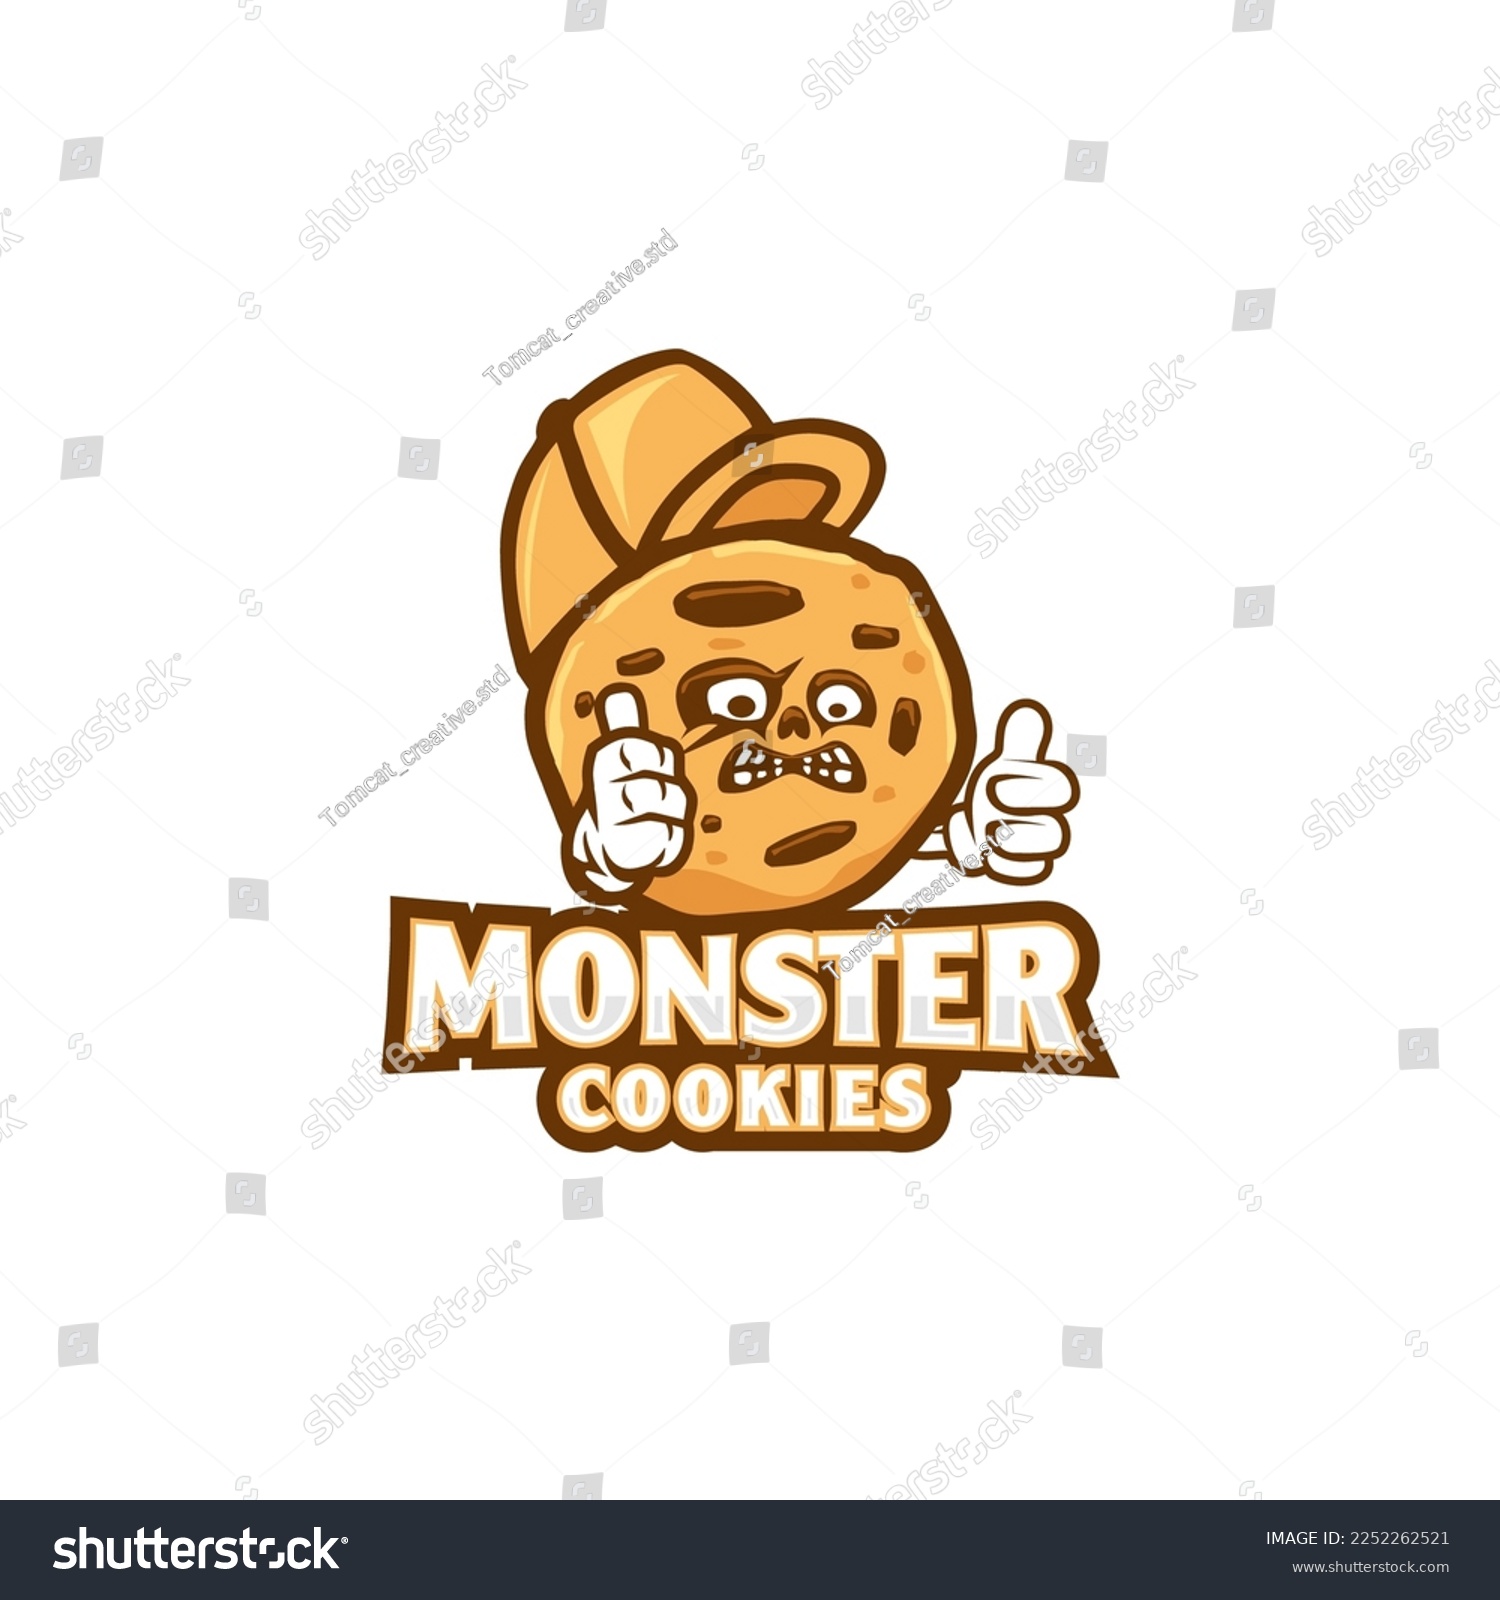 SVG of Cookie monster character mascot logo svg